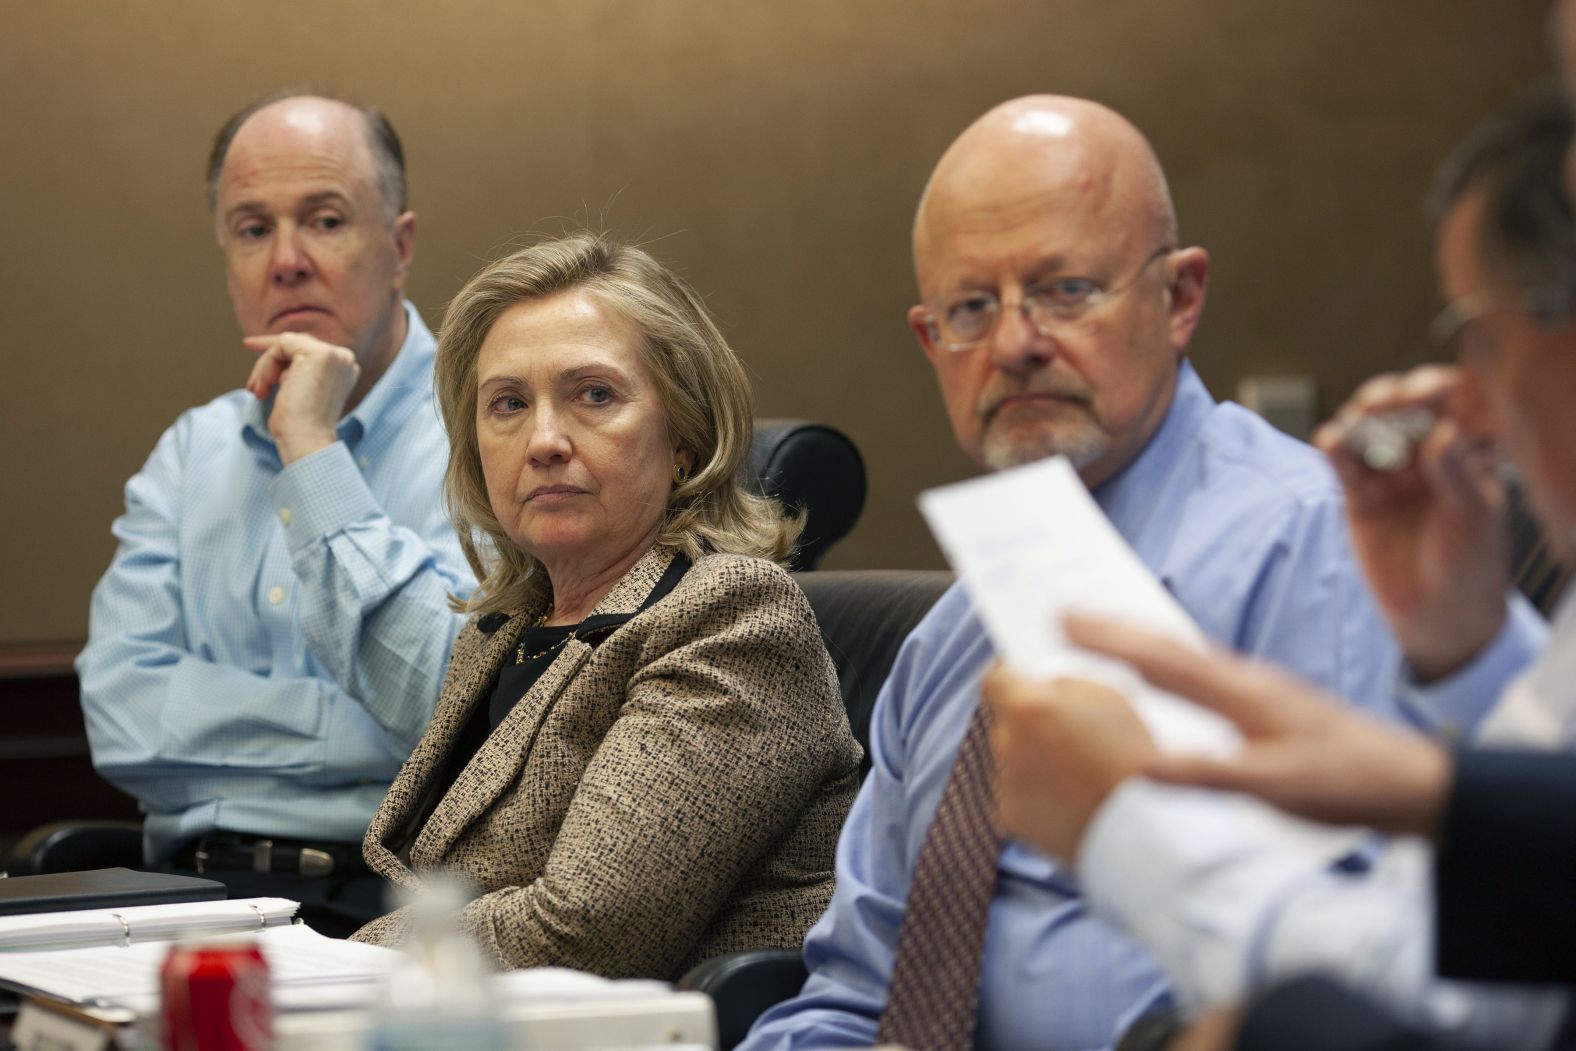 Clinton listens intently during a Situation Room briefing.